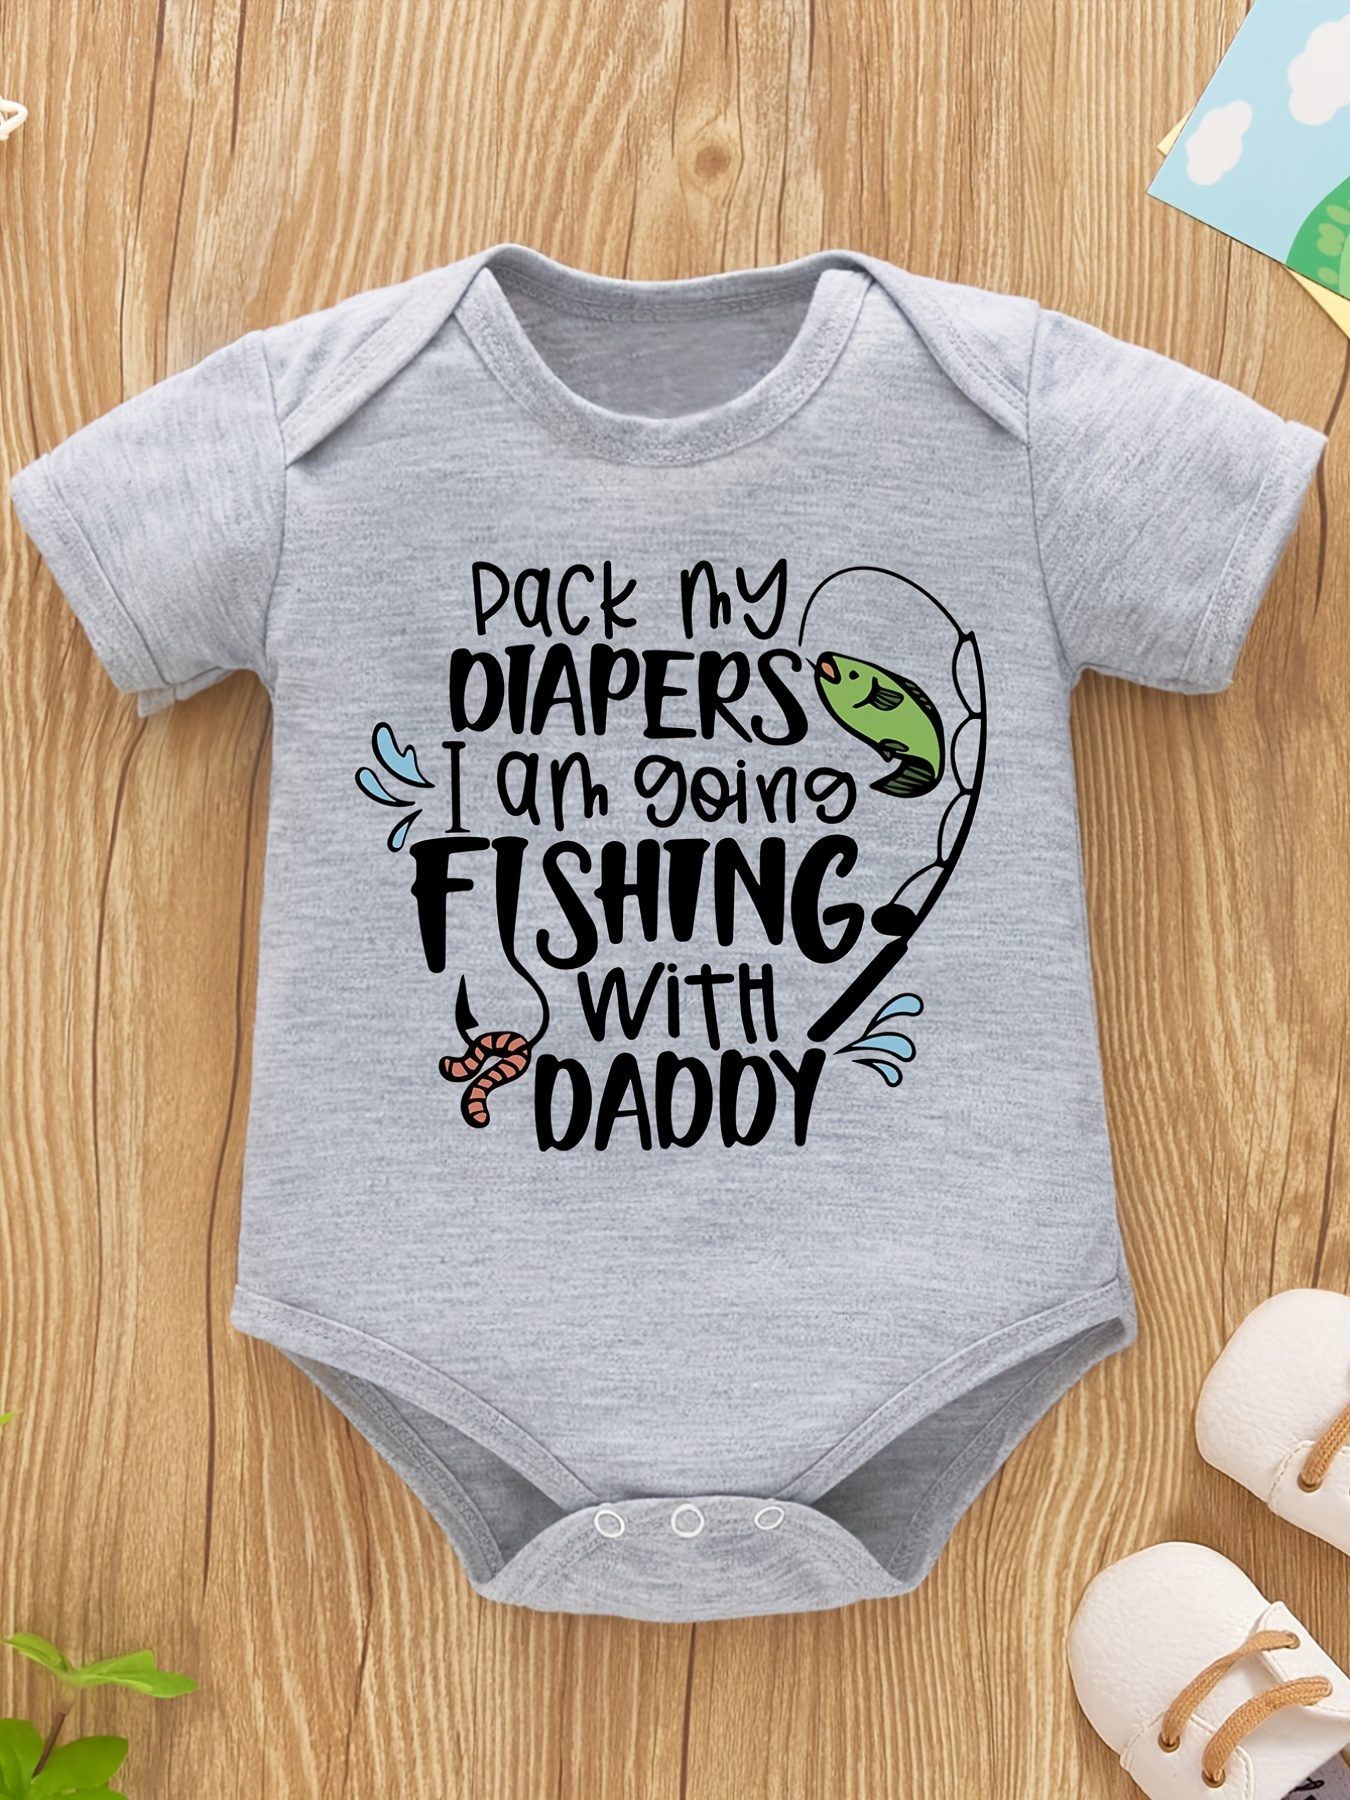 Baby Girls And Boys Cute Pack My Diapers I'm Going Fishing With Daddy Short Sleeve Onesie Clothes For Summer